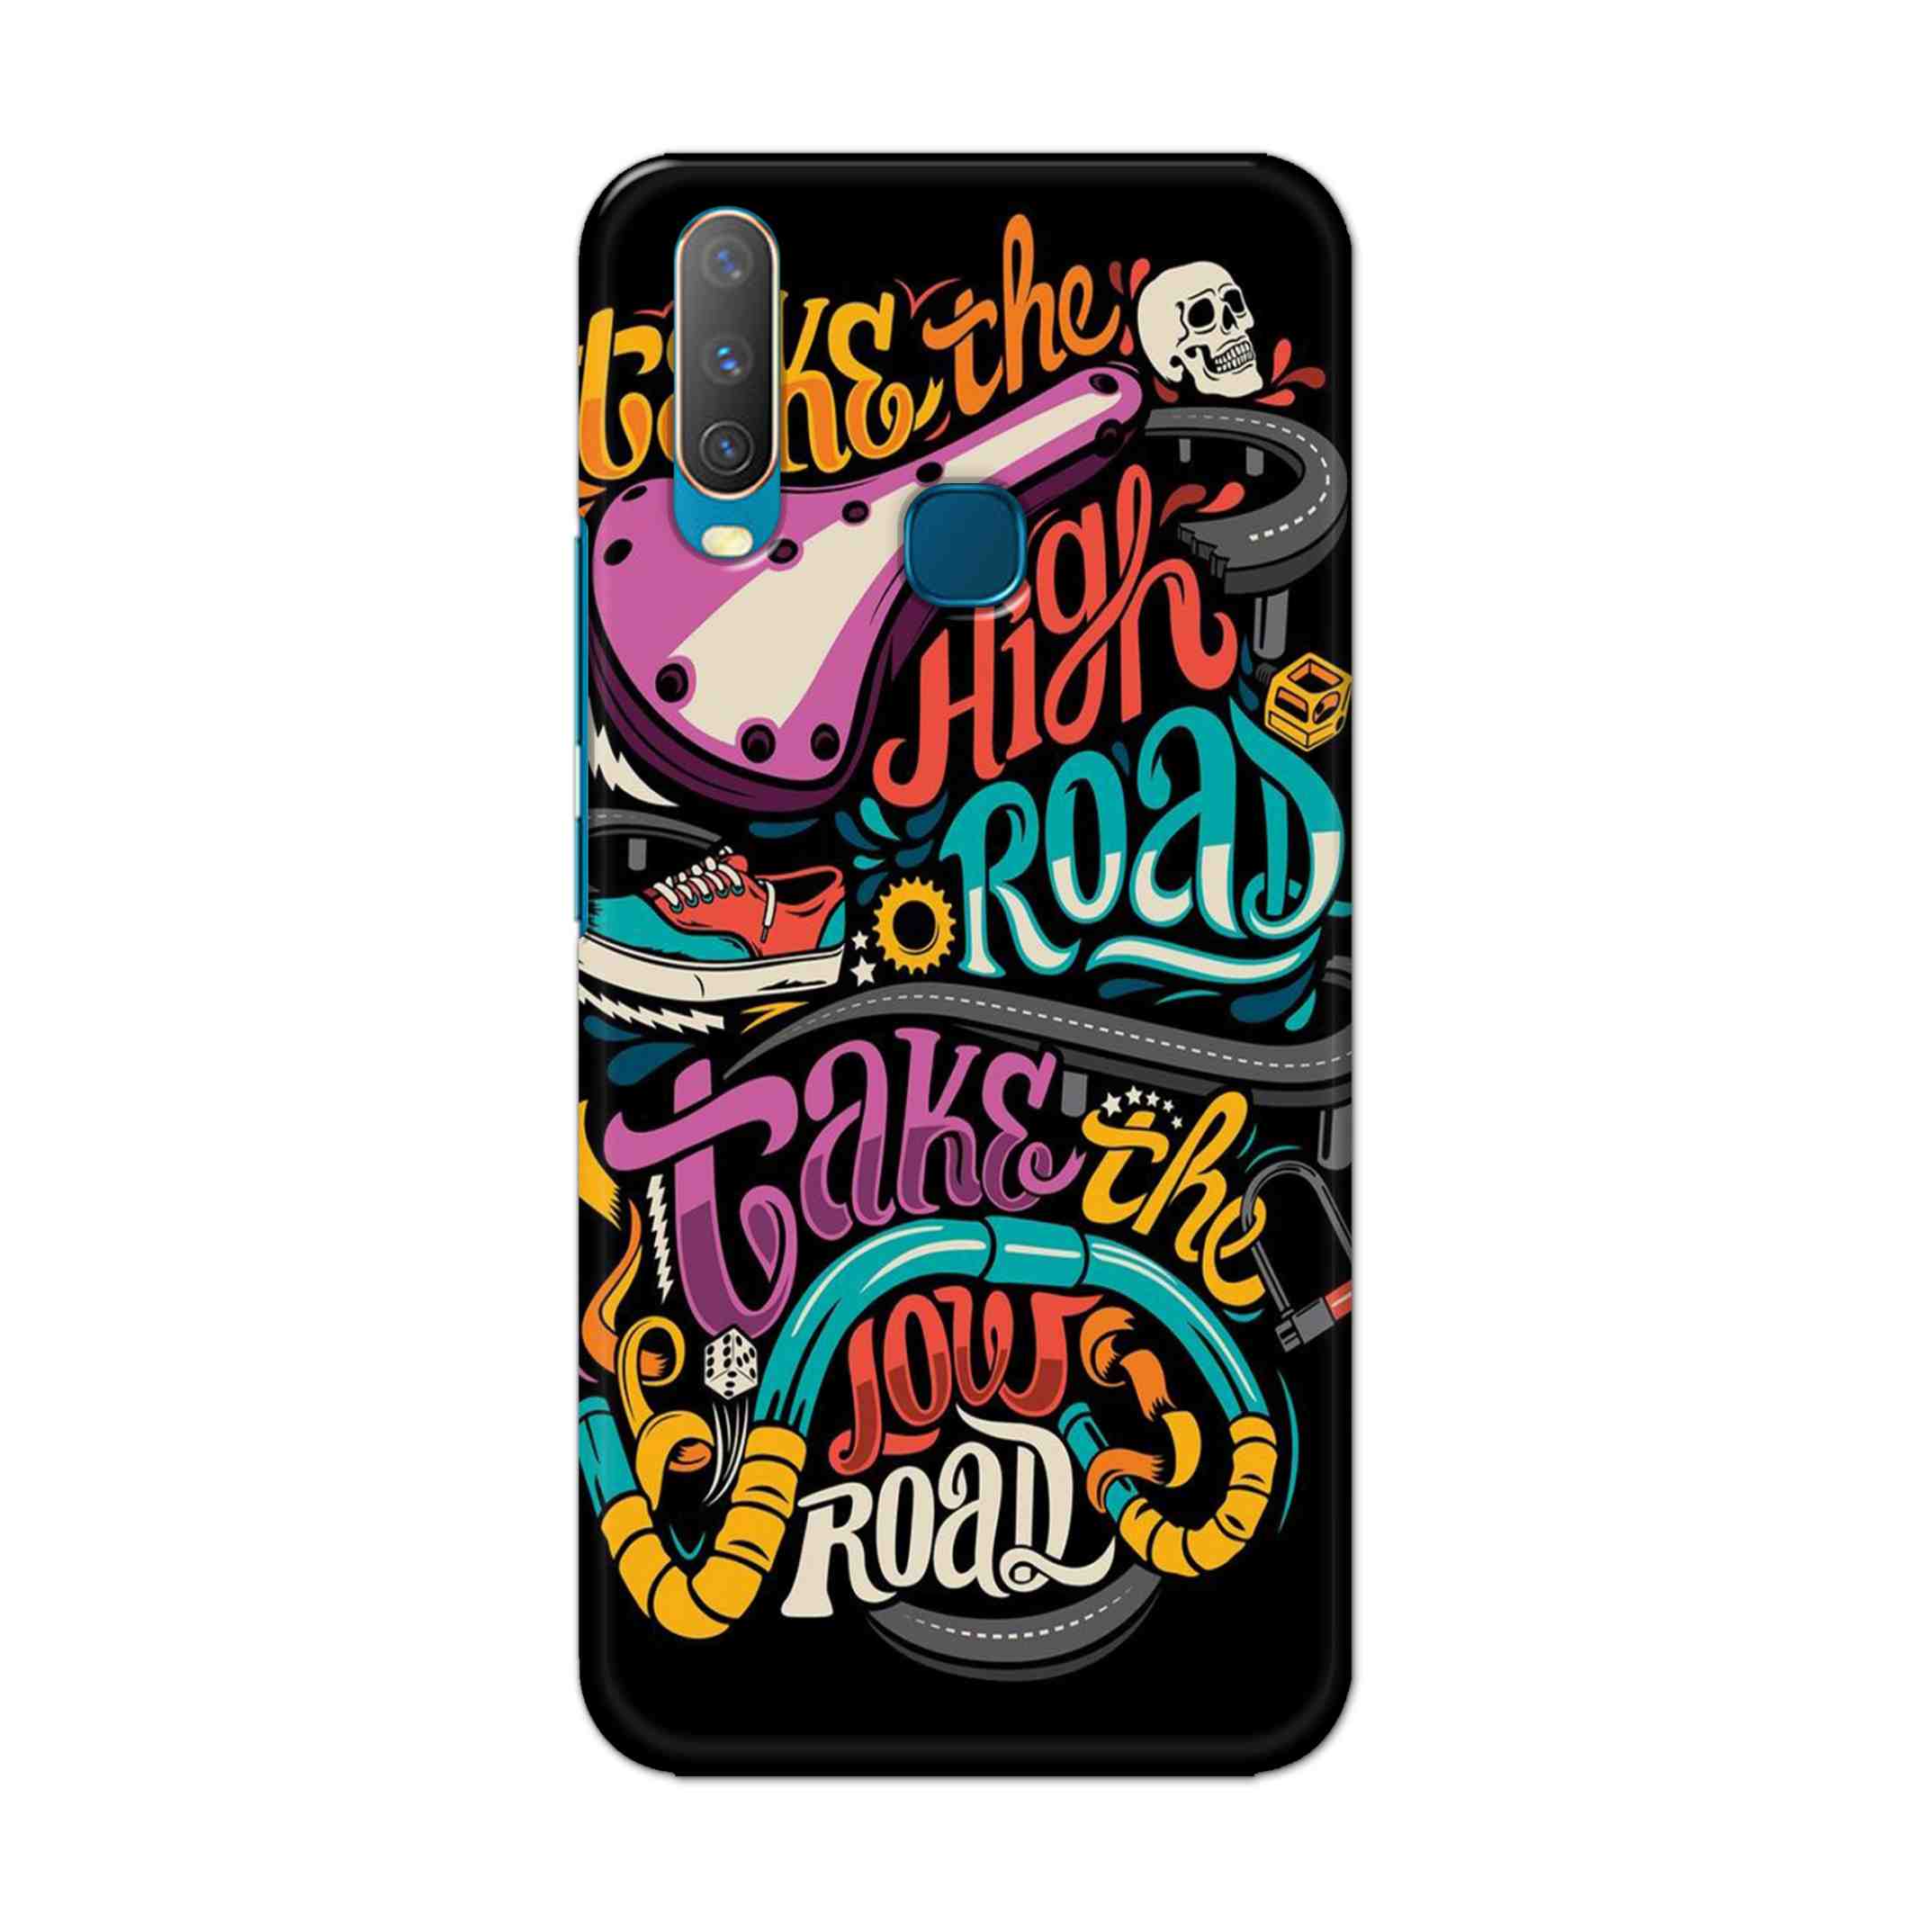 Buy Take The High Road Hard Back Mobile Phone Case Cover For Vivo Y17 / U10 Online